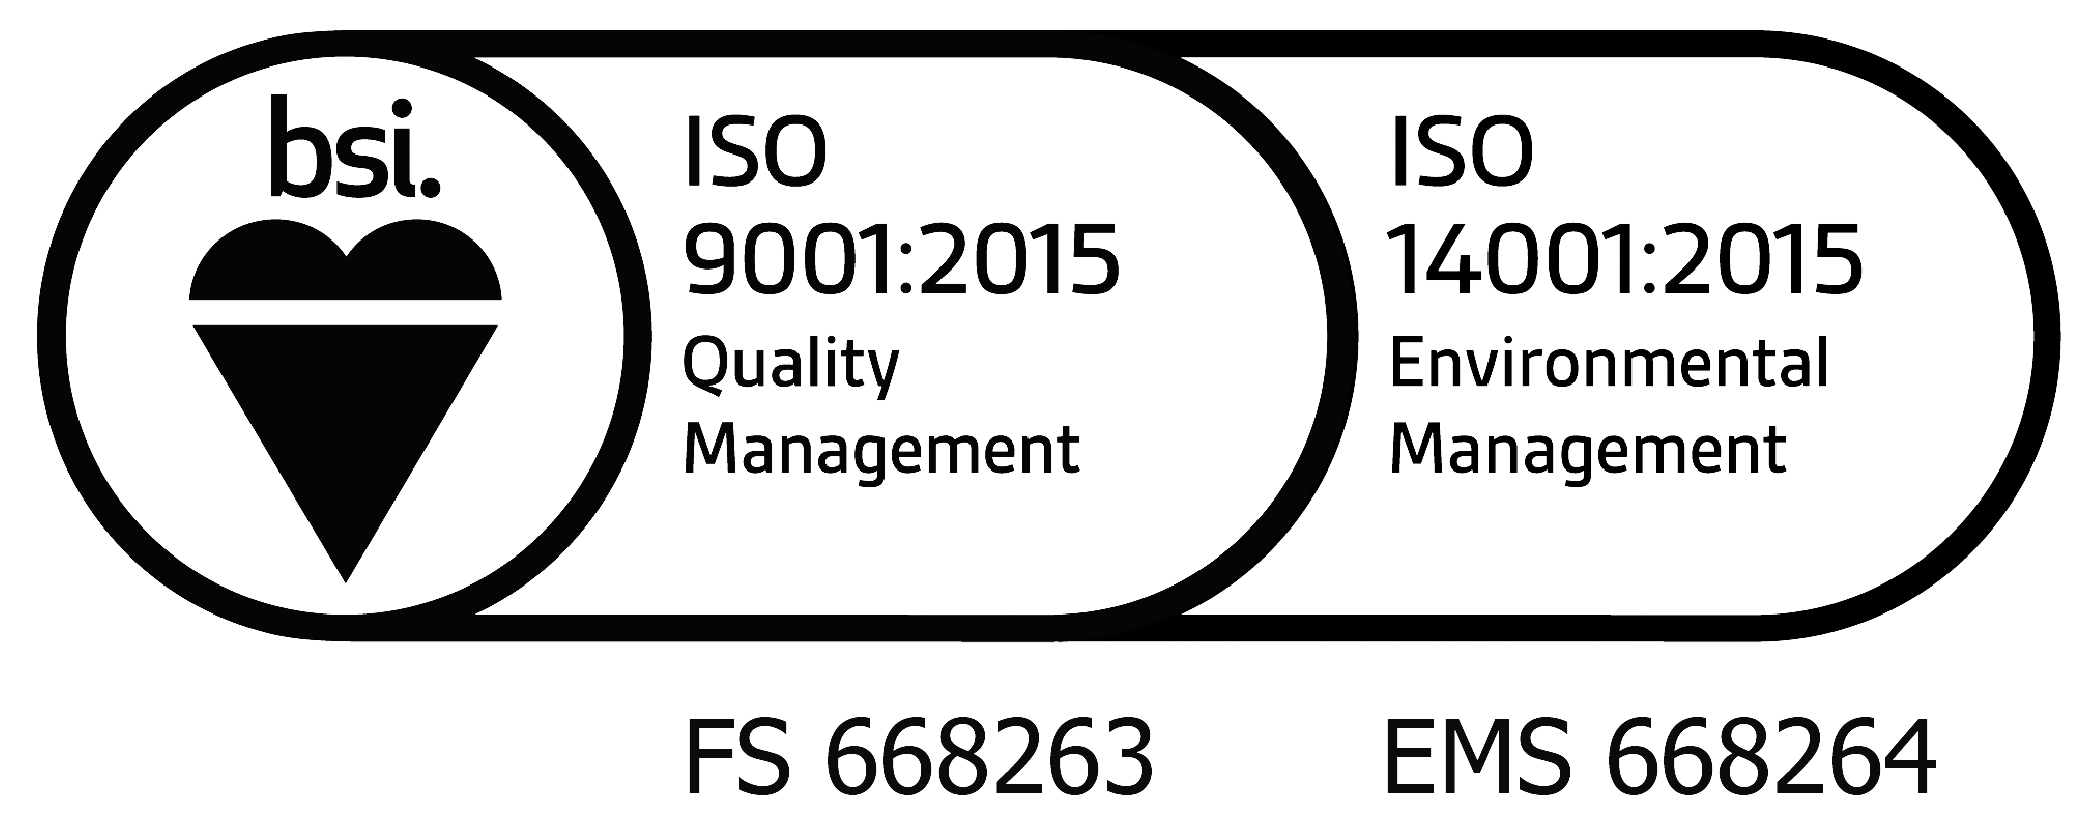 Profab Access is a BSI ISO9001 Quality Management and BSI140001 Environmental Management Assured UK manufacturing company